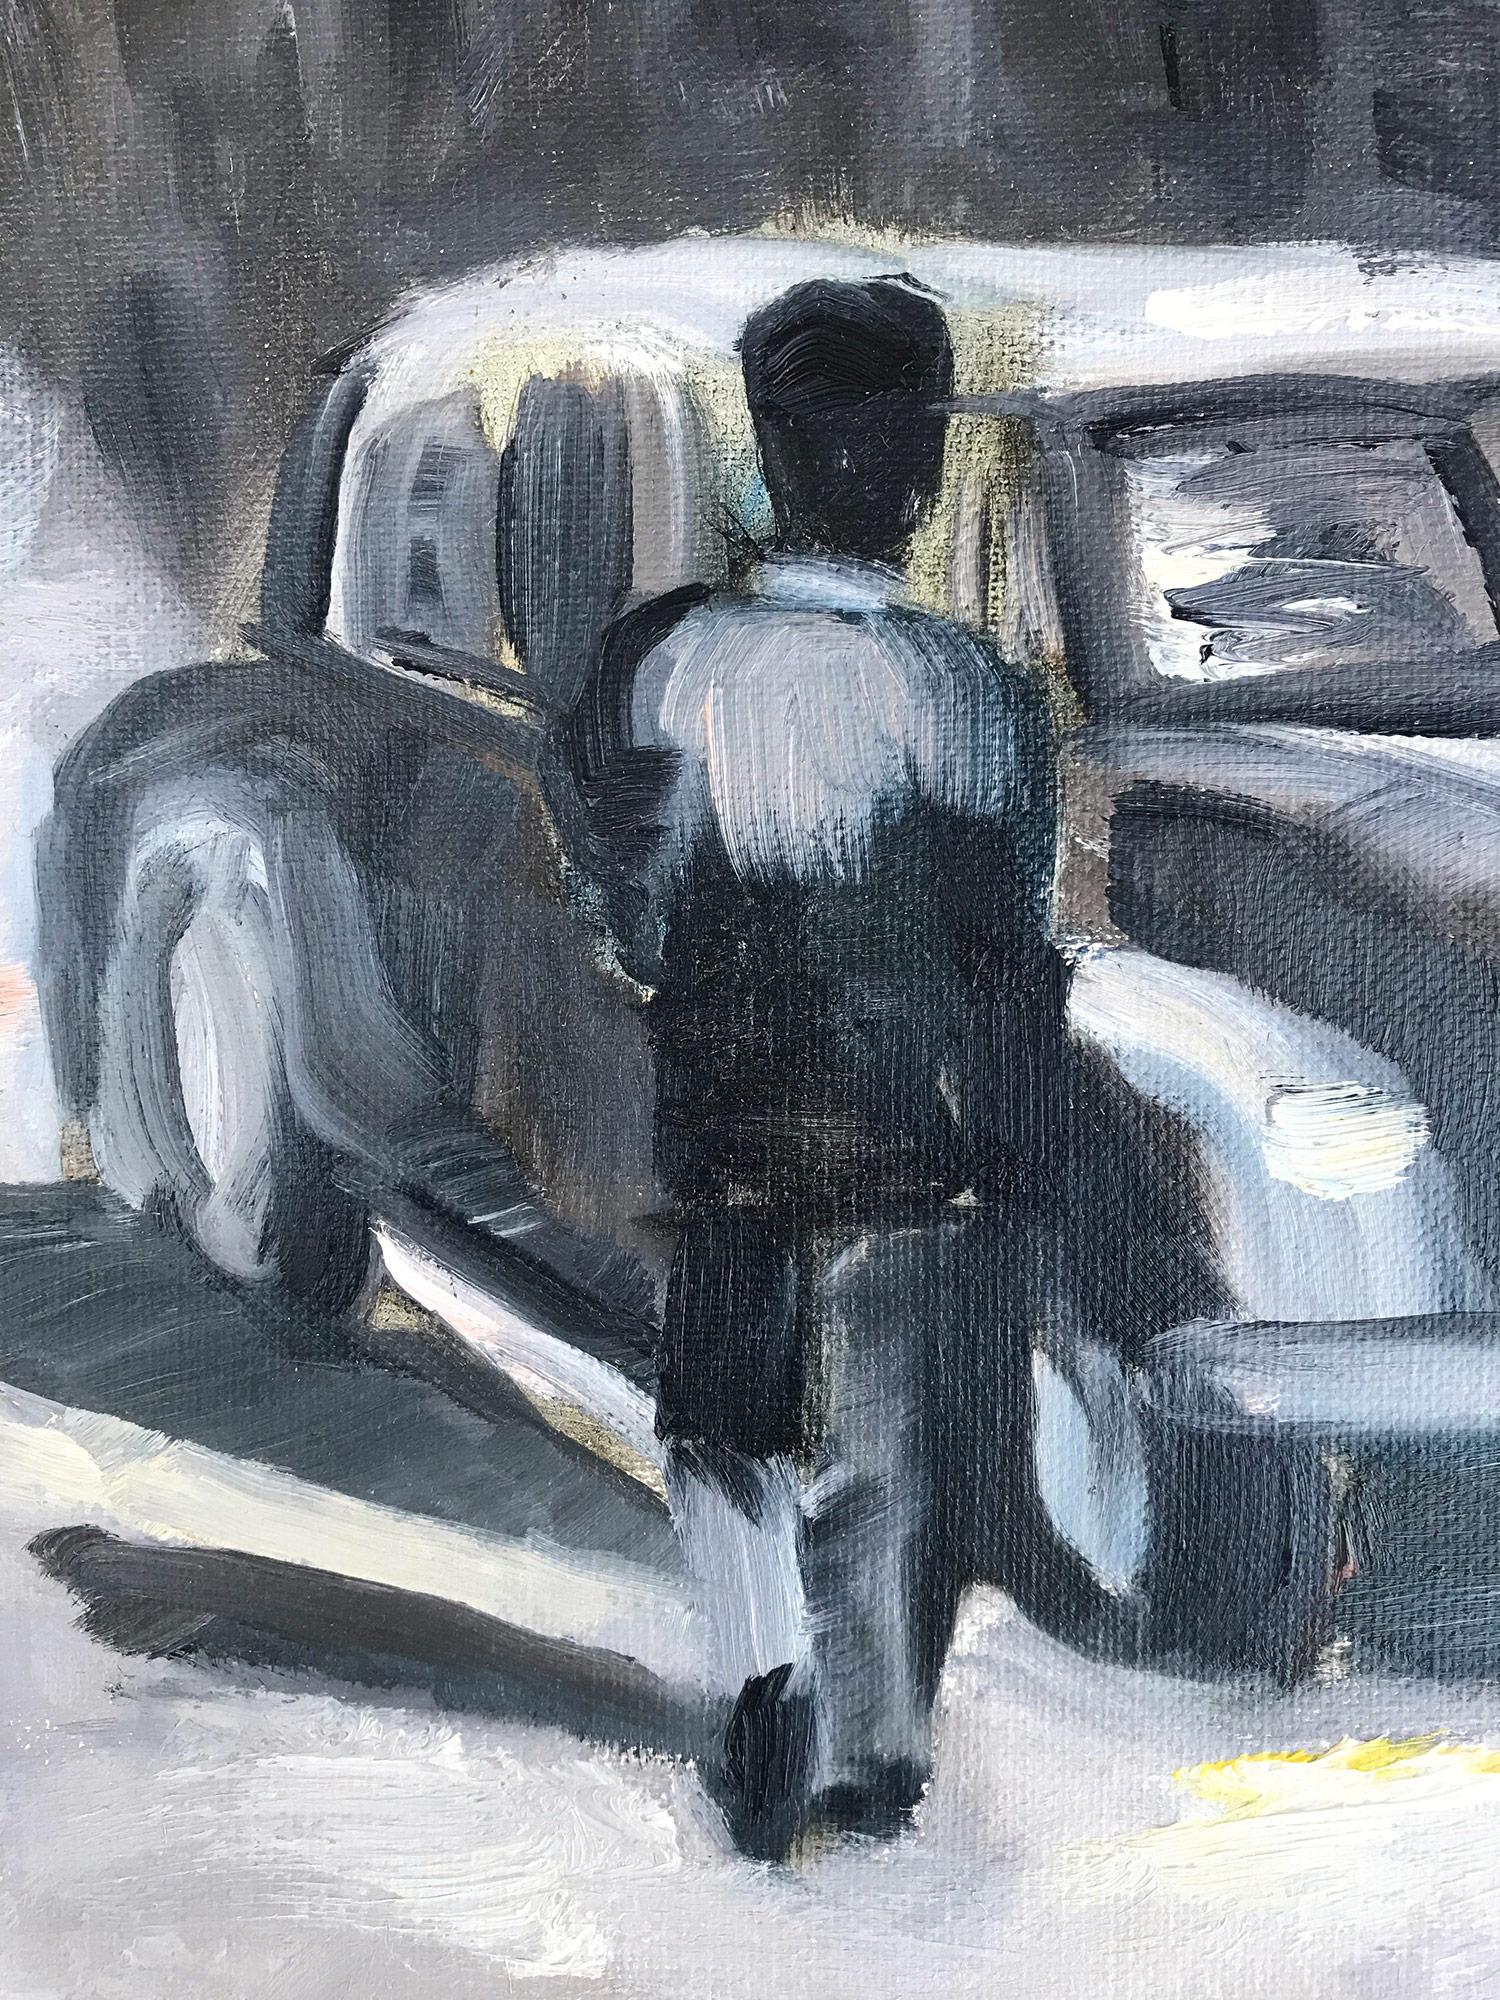 A wonderful depiction of a day in the life 1930s in New York City. Here people walk across the street as a car waits for them to pass. An impressionistic work, with great use of contrasts and thick use of paint.

Art measures 18 x 24 inches

Cindy